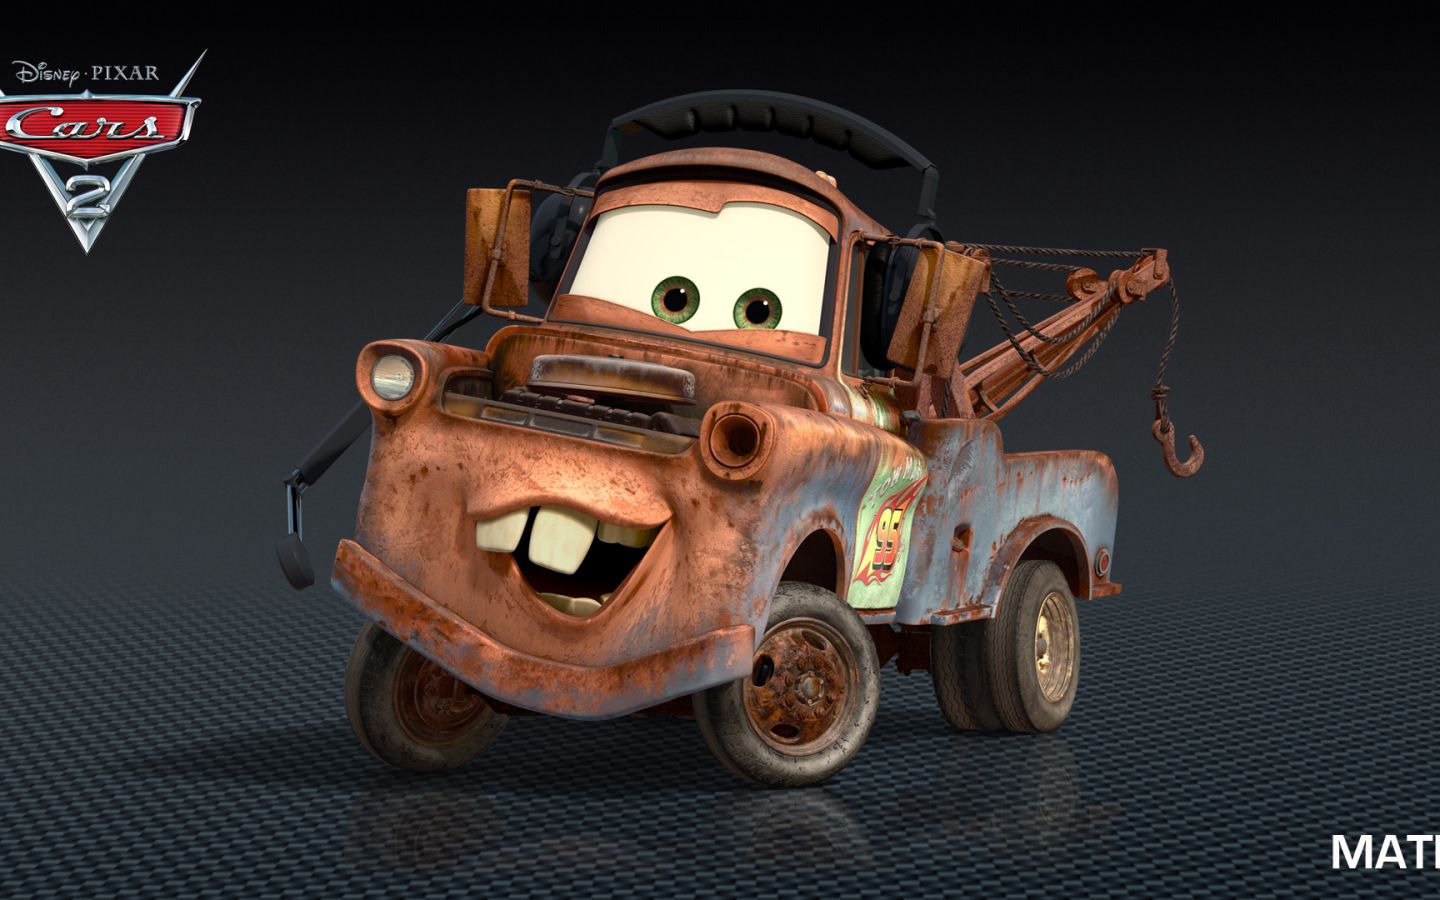 Cars 2 wallpapers #6 - 1440x900